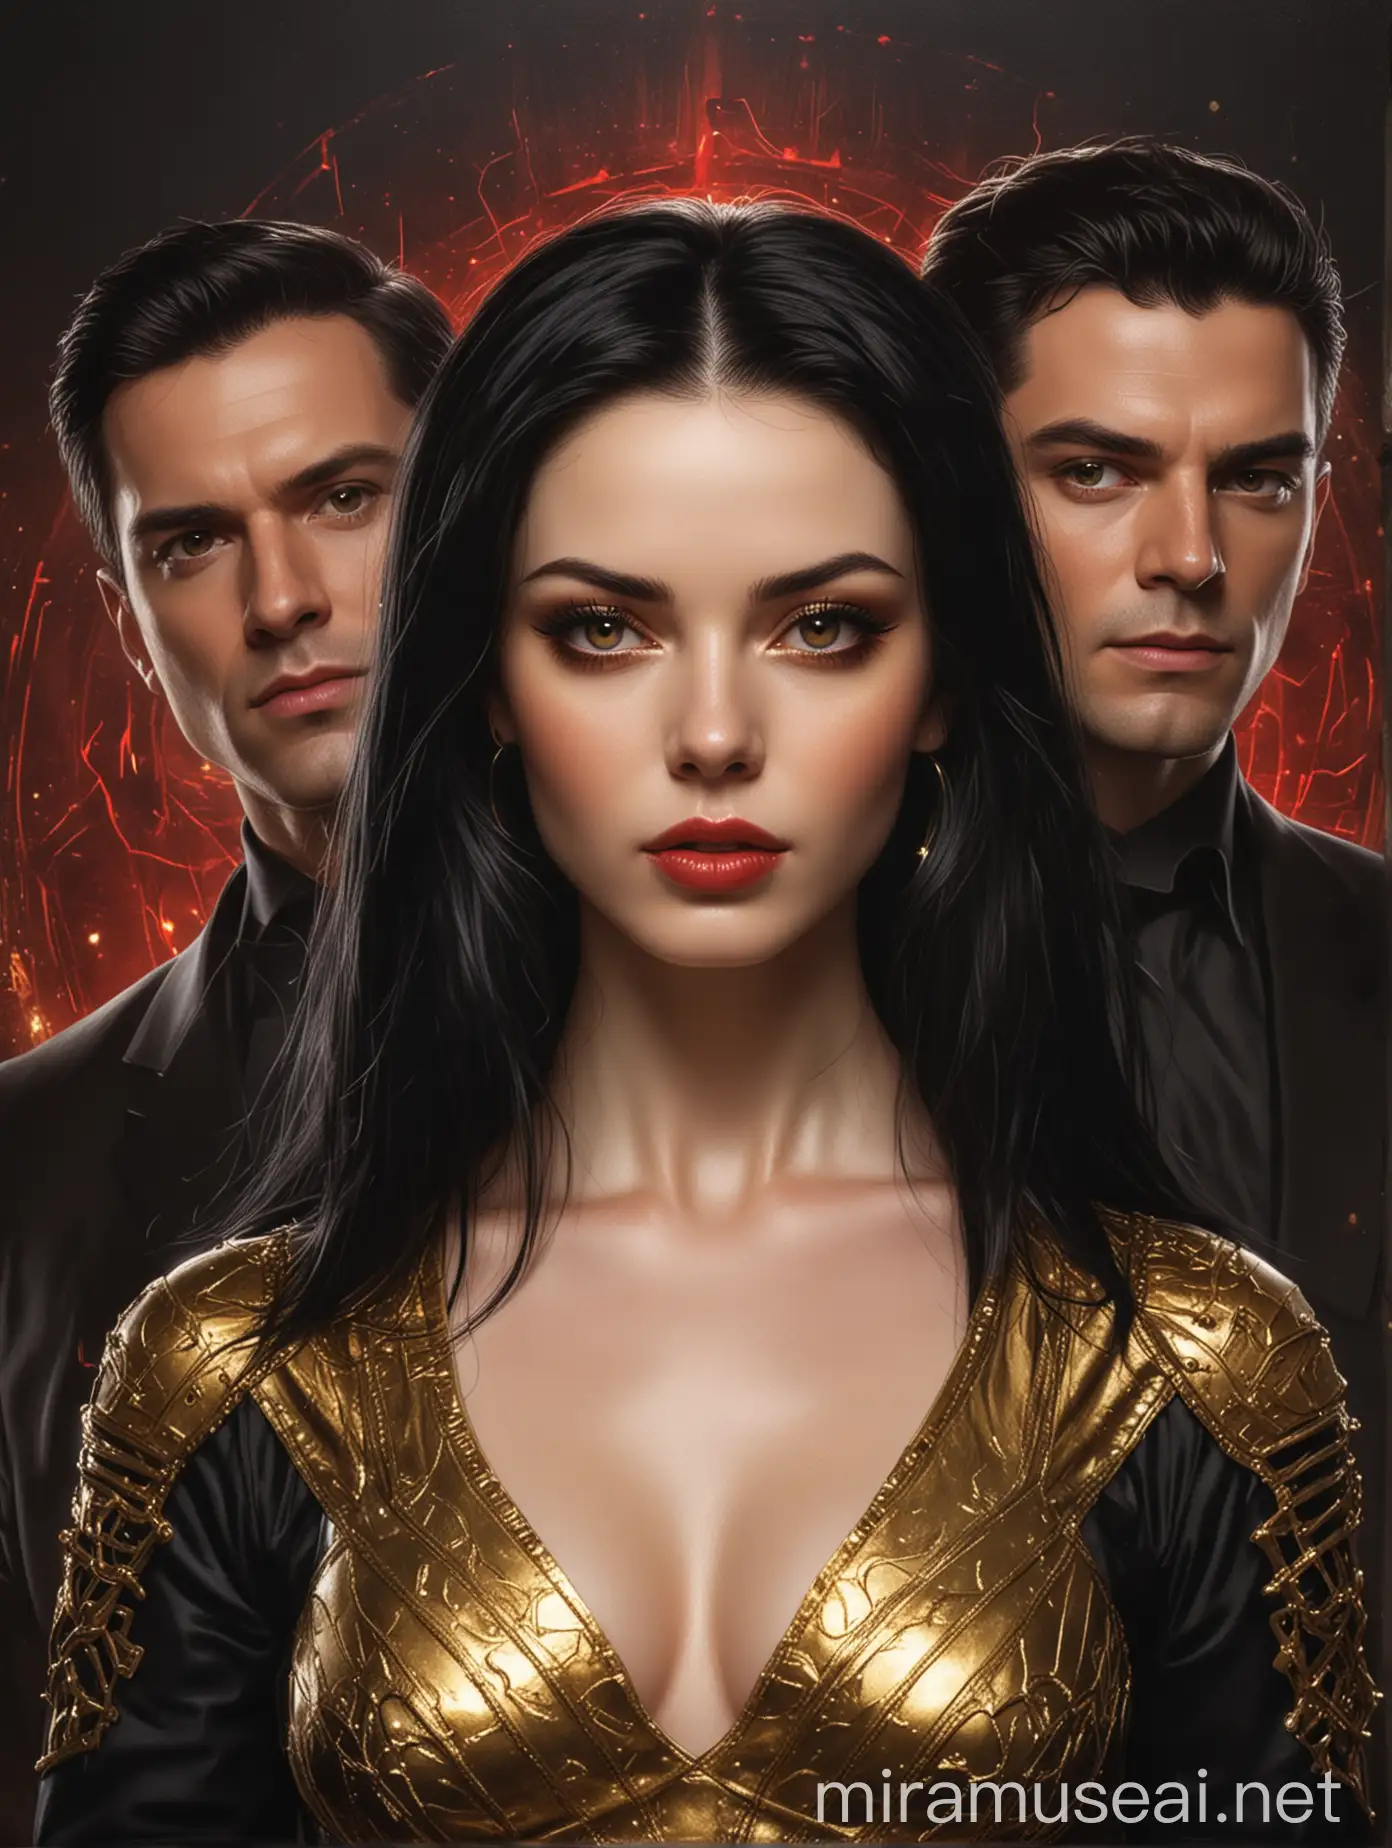 The subject of the portrait is a woman with pale skin and a flawless physique and a handsome that has flawless pale skin. The woman have long, lustrous black hair that shines brightly and the woman is wearing a captivating black agent outfit while the man on her side is wearing black and gold agent outfit and the man should have short regulation-cut black hair. The image should prominently highlight their gold eyes. The background should be dark while there are a lot of red lasers.